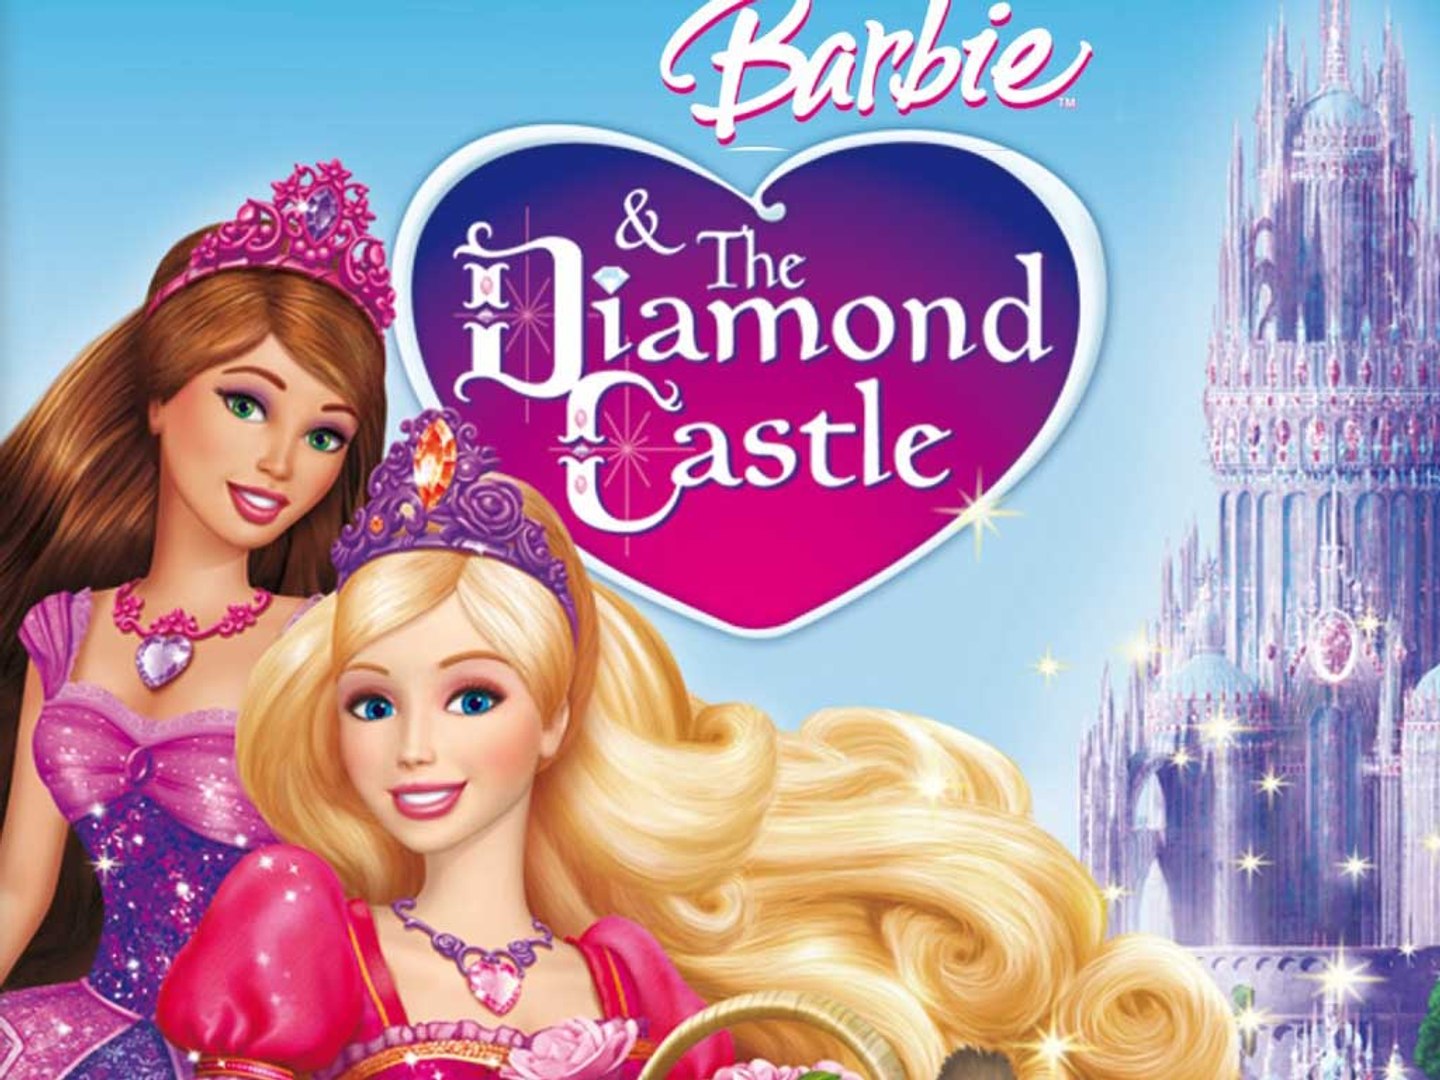 Barbie & the Diamond Castle Complete Cinema in Hindi/English Part - I -  video Dailymotion